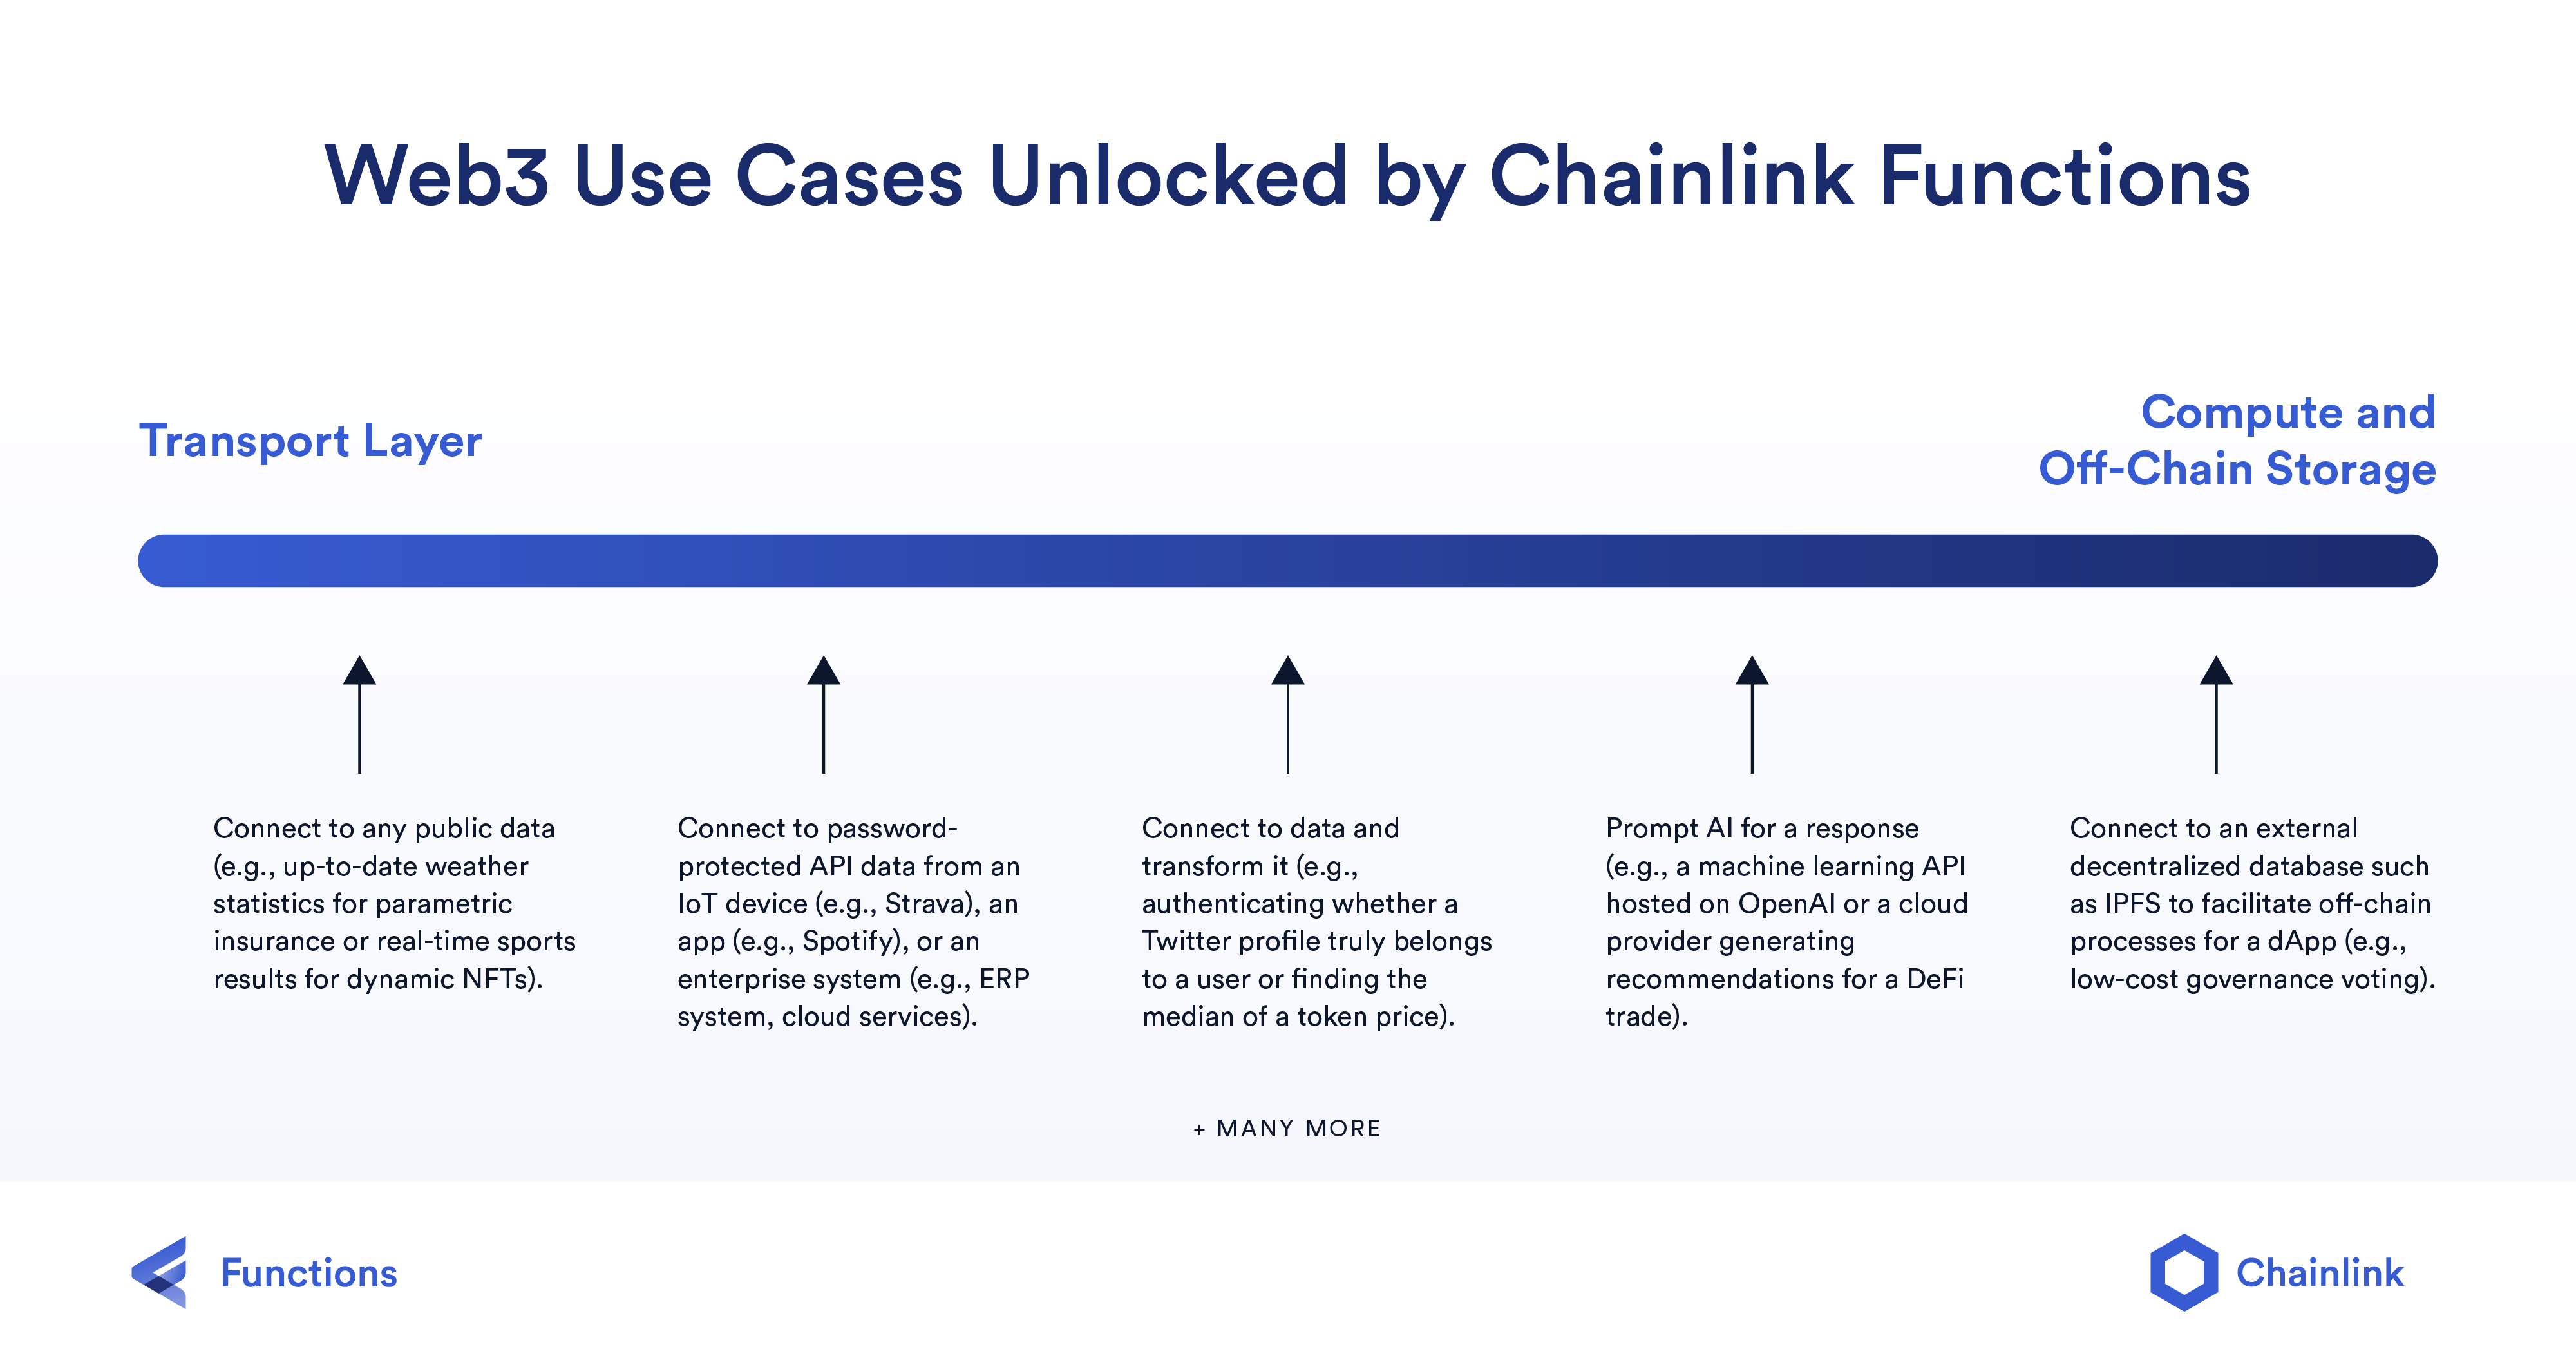 Web3 Use Cases Unlocked by Chainlink Functions